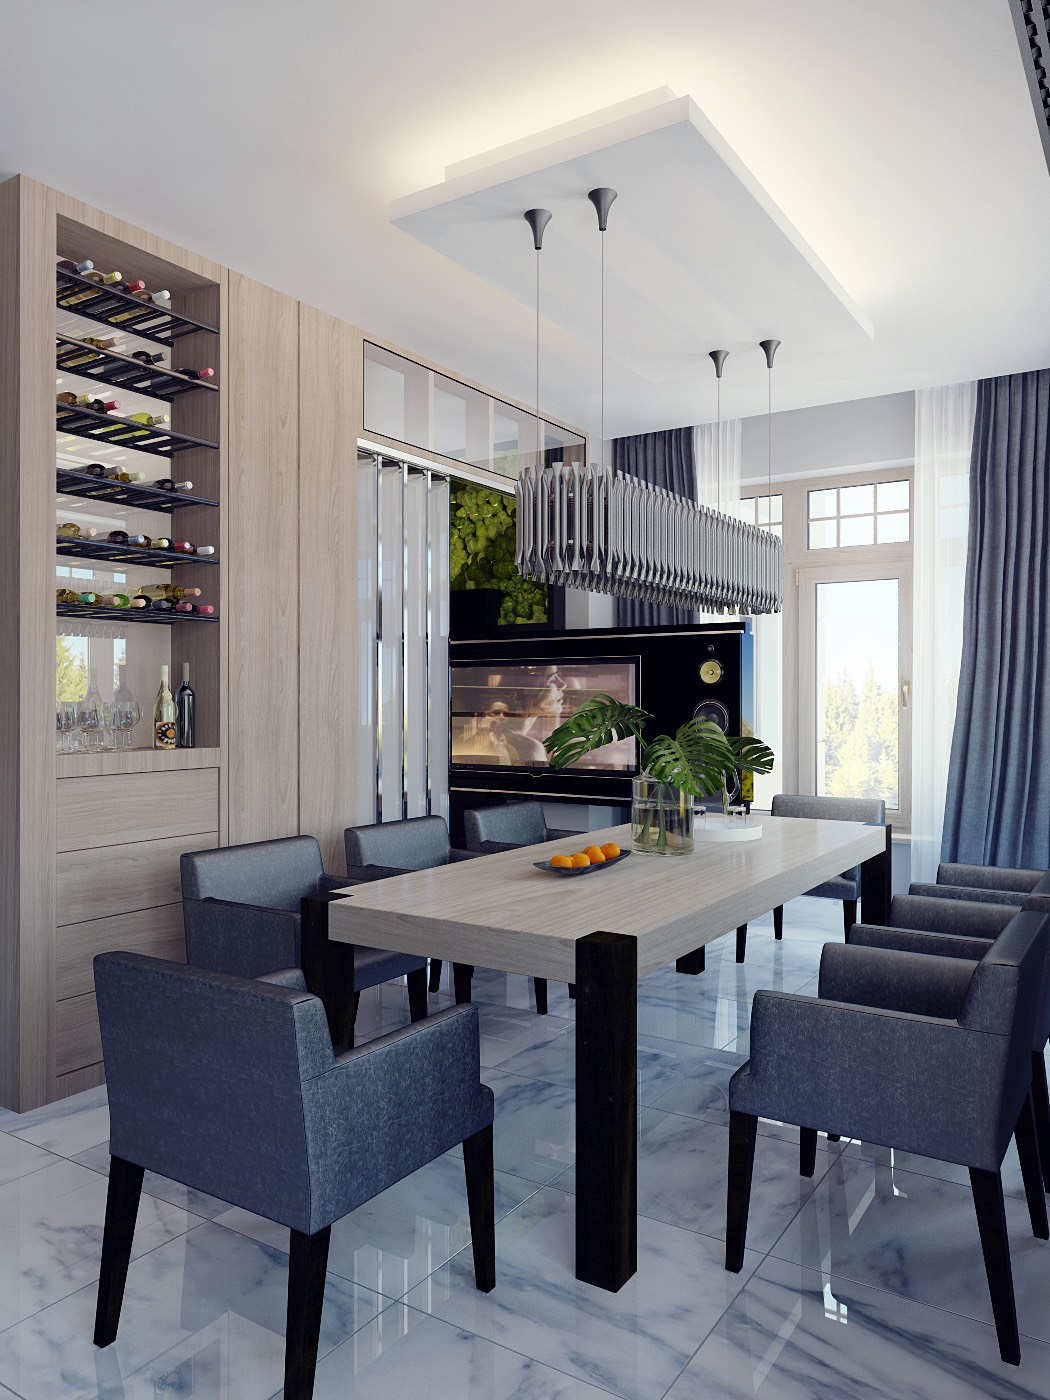 How to do wine storage "width =" 1050 "height =" 1400 "srcset =" https://mileray.com/wp-content/uploads/2020/05/1588513587_861_Inspiring-Luxury-Dining-Room-Designs-Full-With-Cool-and-Stylish.jpg 1050w, https: // mileray.com/wp-content/uploads/2016/03/wine-storage-ideas-225x300.jpg 225w, https://mileray.com/wp-content/uploads/2016/03/wine-storage-ideas-768x1024 .jpg 768w, https://mileray.com/wp-content/uploads/2016/03/wine-storage-ideas-696x928.jpg 696w, https://mileray.com/wp-content/uploads/2016/03 /wine-storage-ideas-315x420.jpg 315w "Sizes =" (maximum width: 1050px) 100vw, 1050px